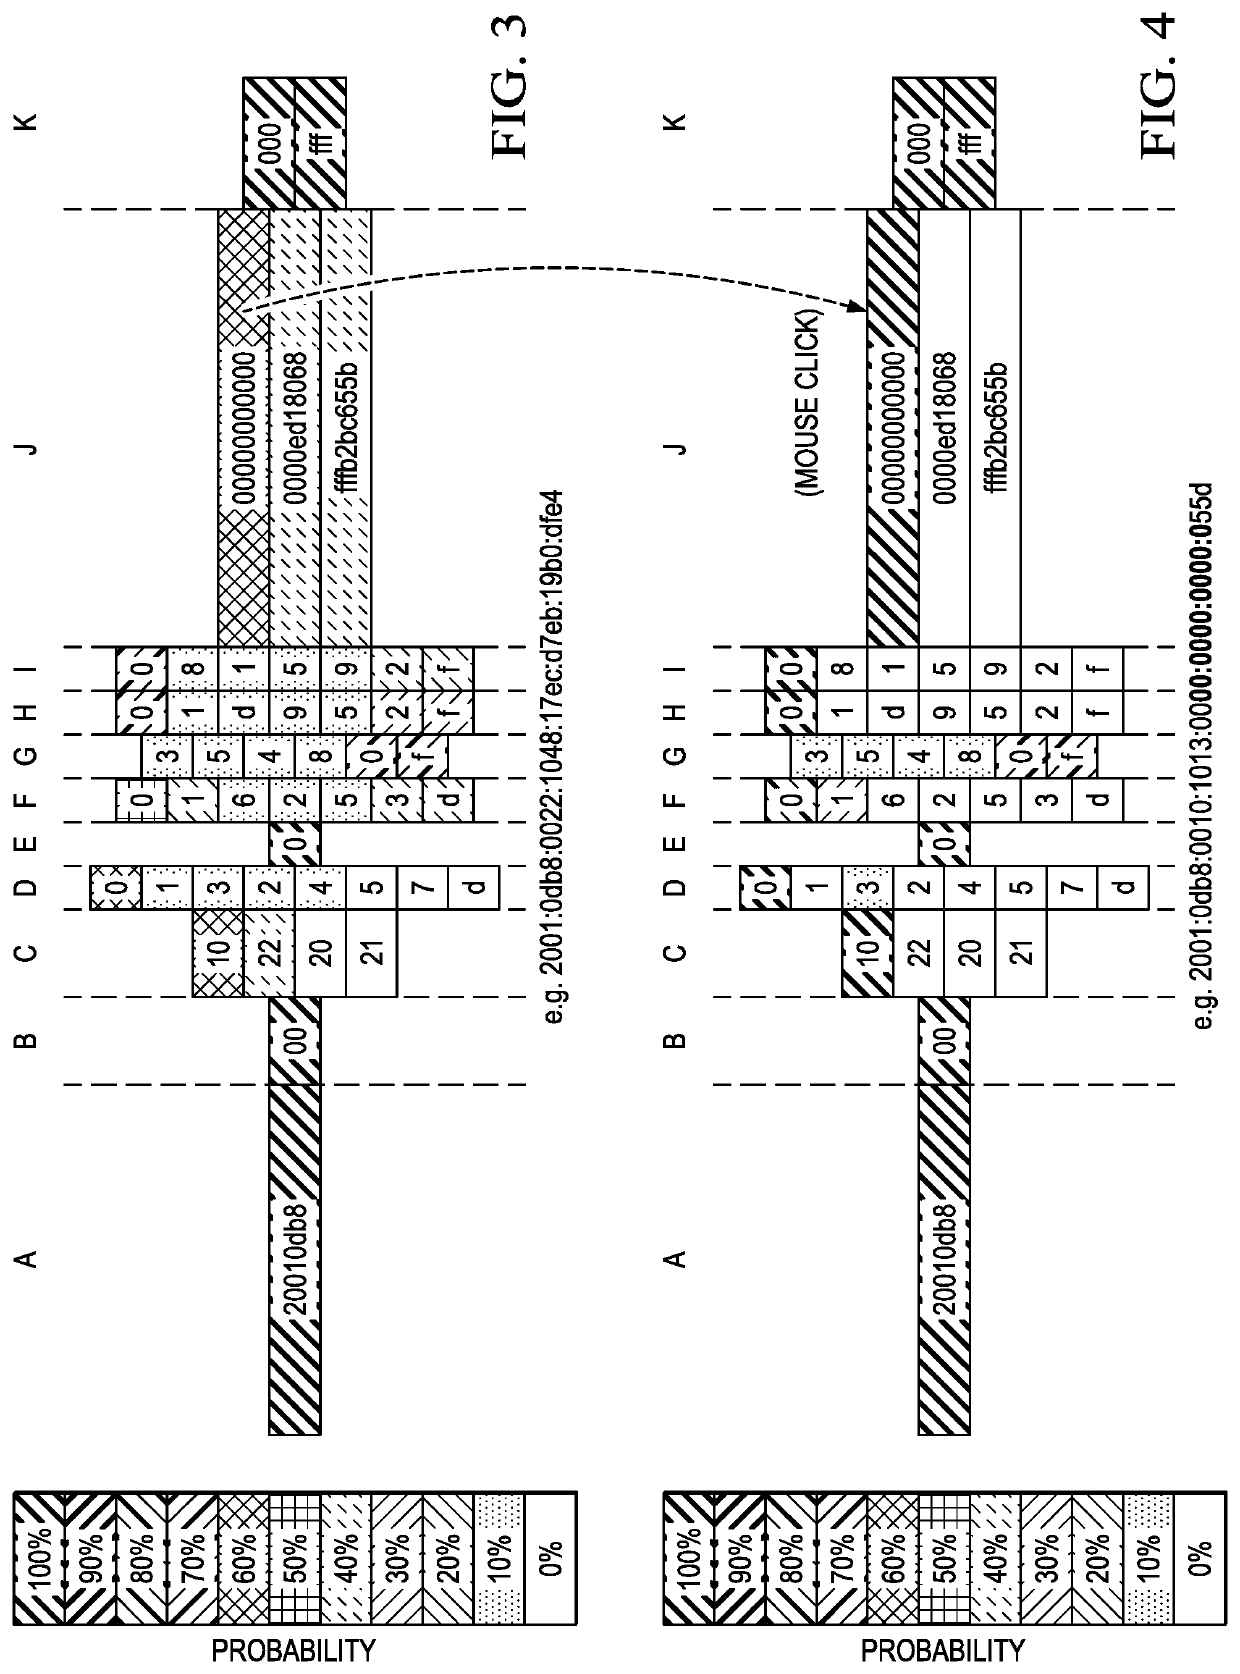 Internet address structure analysis, and applications thereof